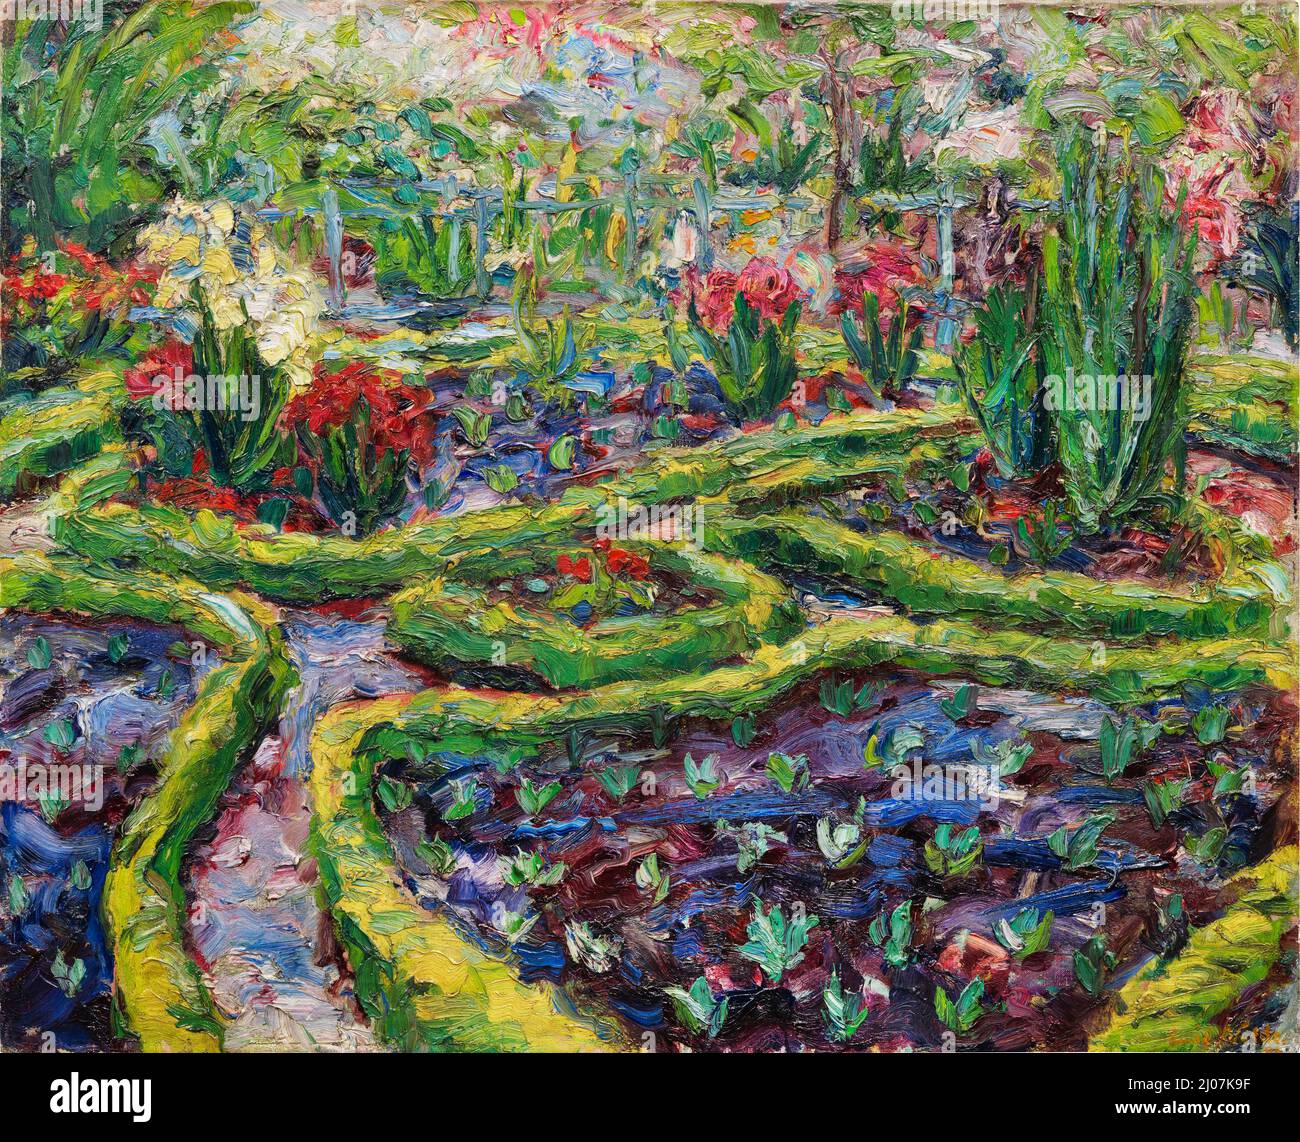 The Boxwood Garden. Museum: PRIVATE COLLECTION. Author: EMIL NOLDE. Stock Photo